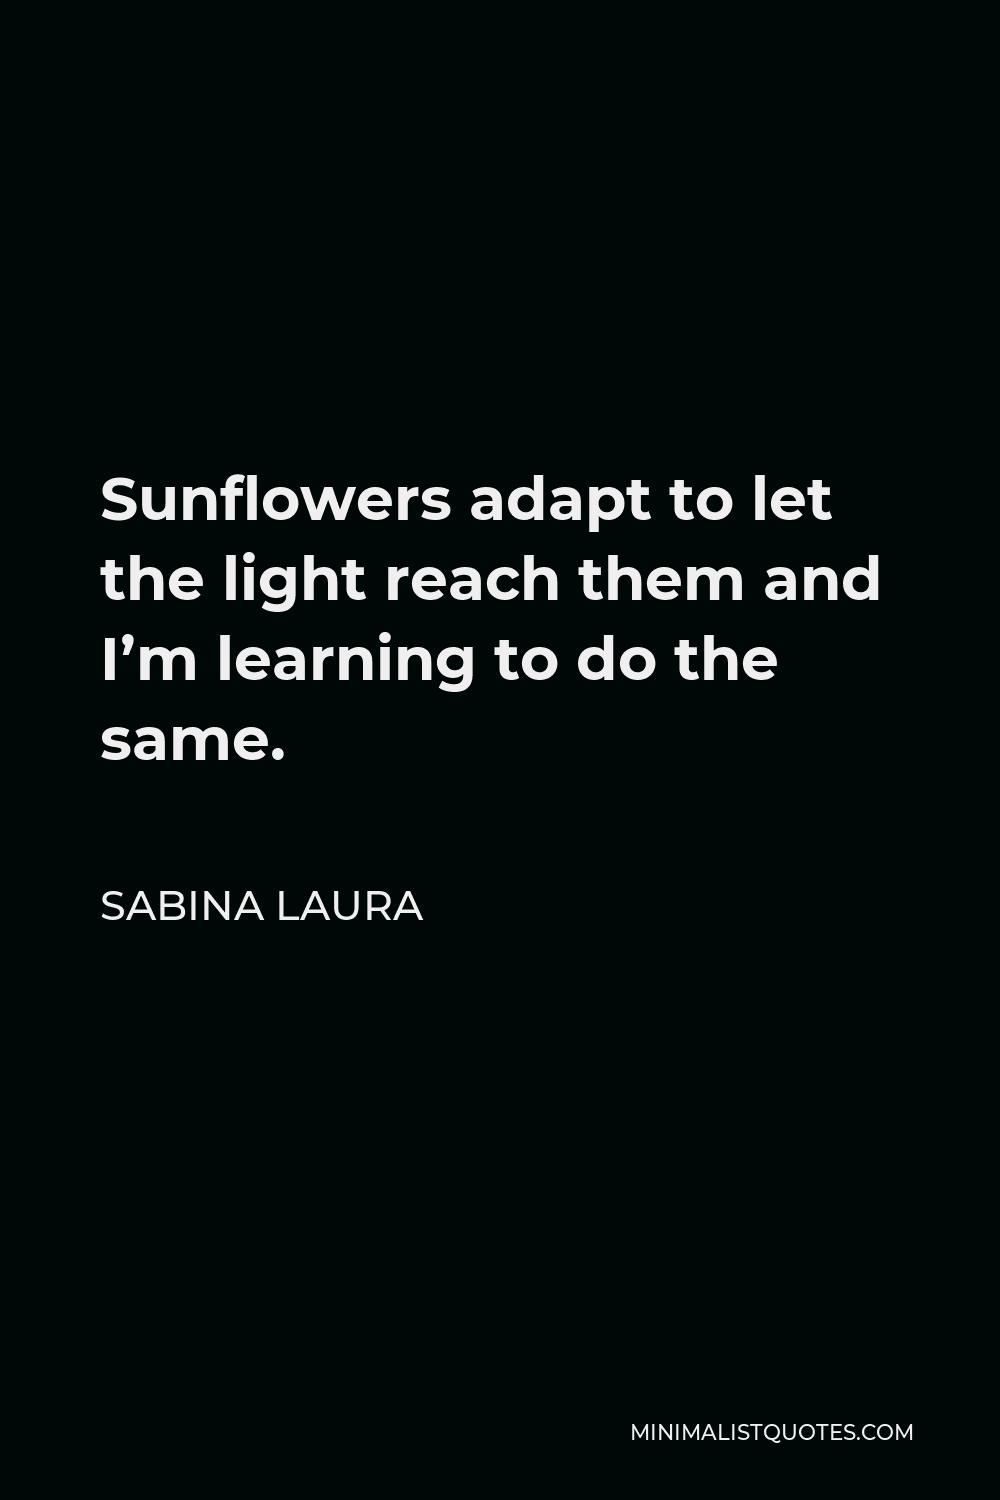 Sabina Laura Quote - Sunflowers adapt to let the light reach them and I’m learning to do the same.